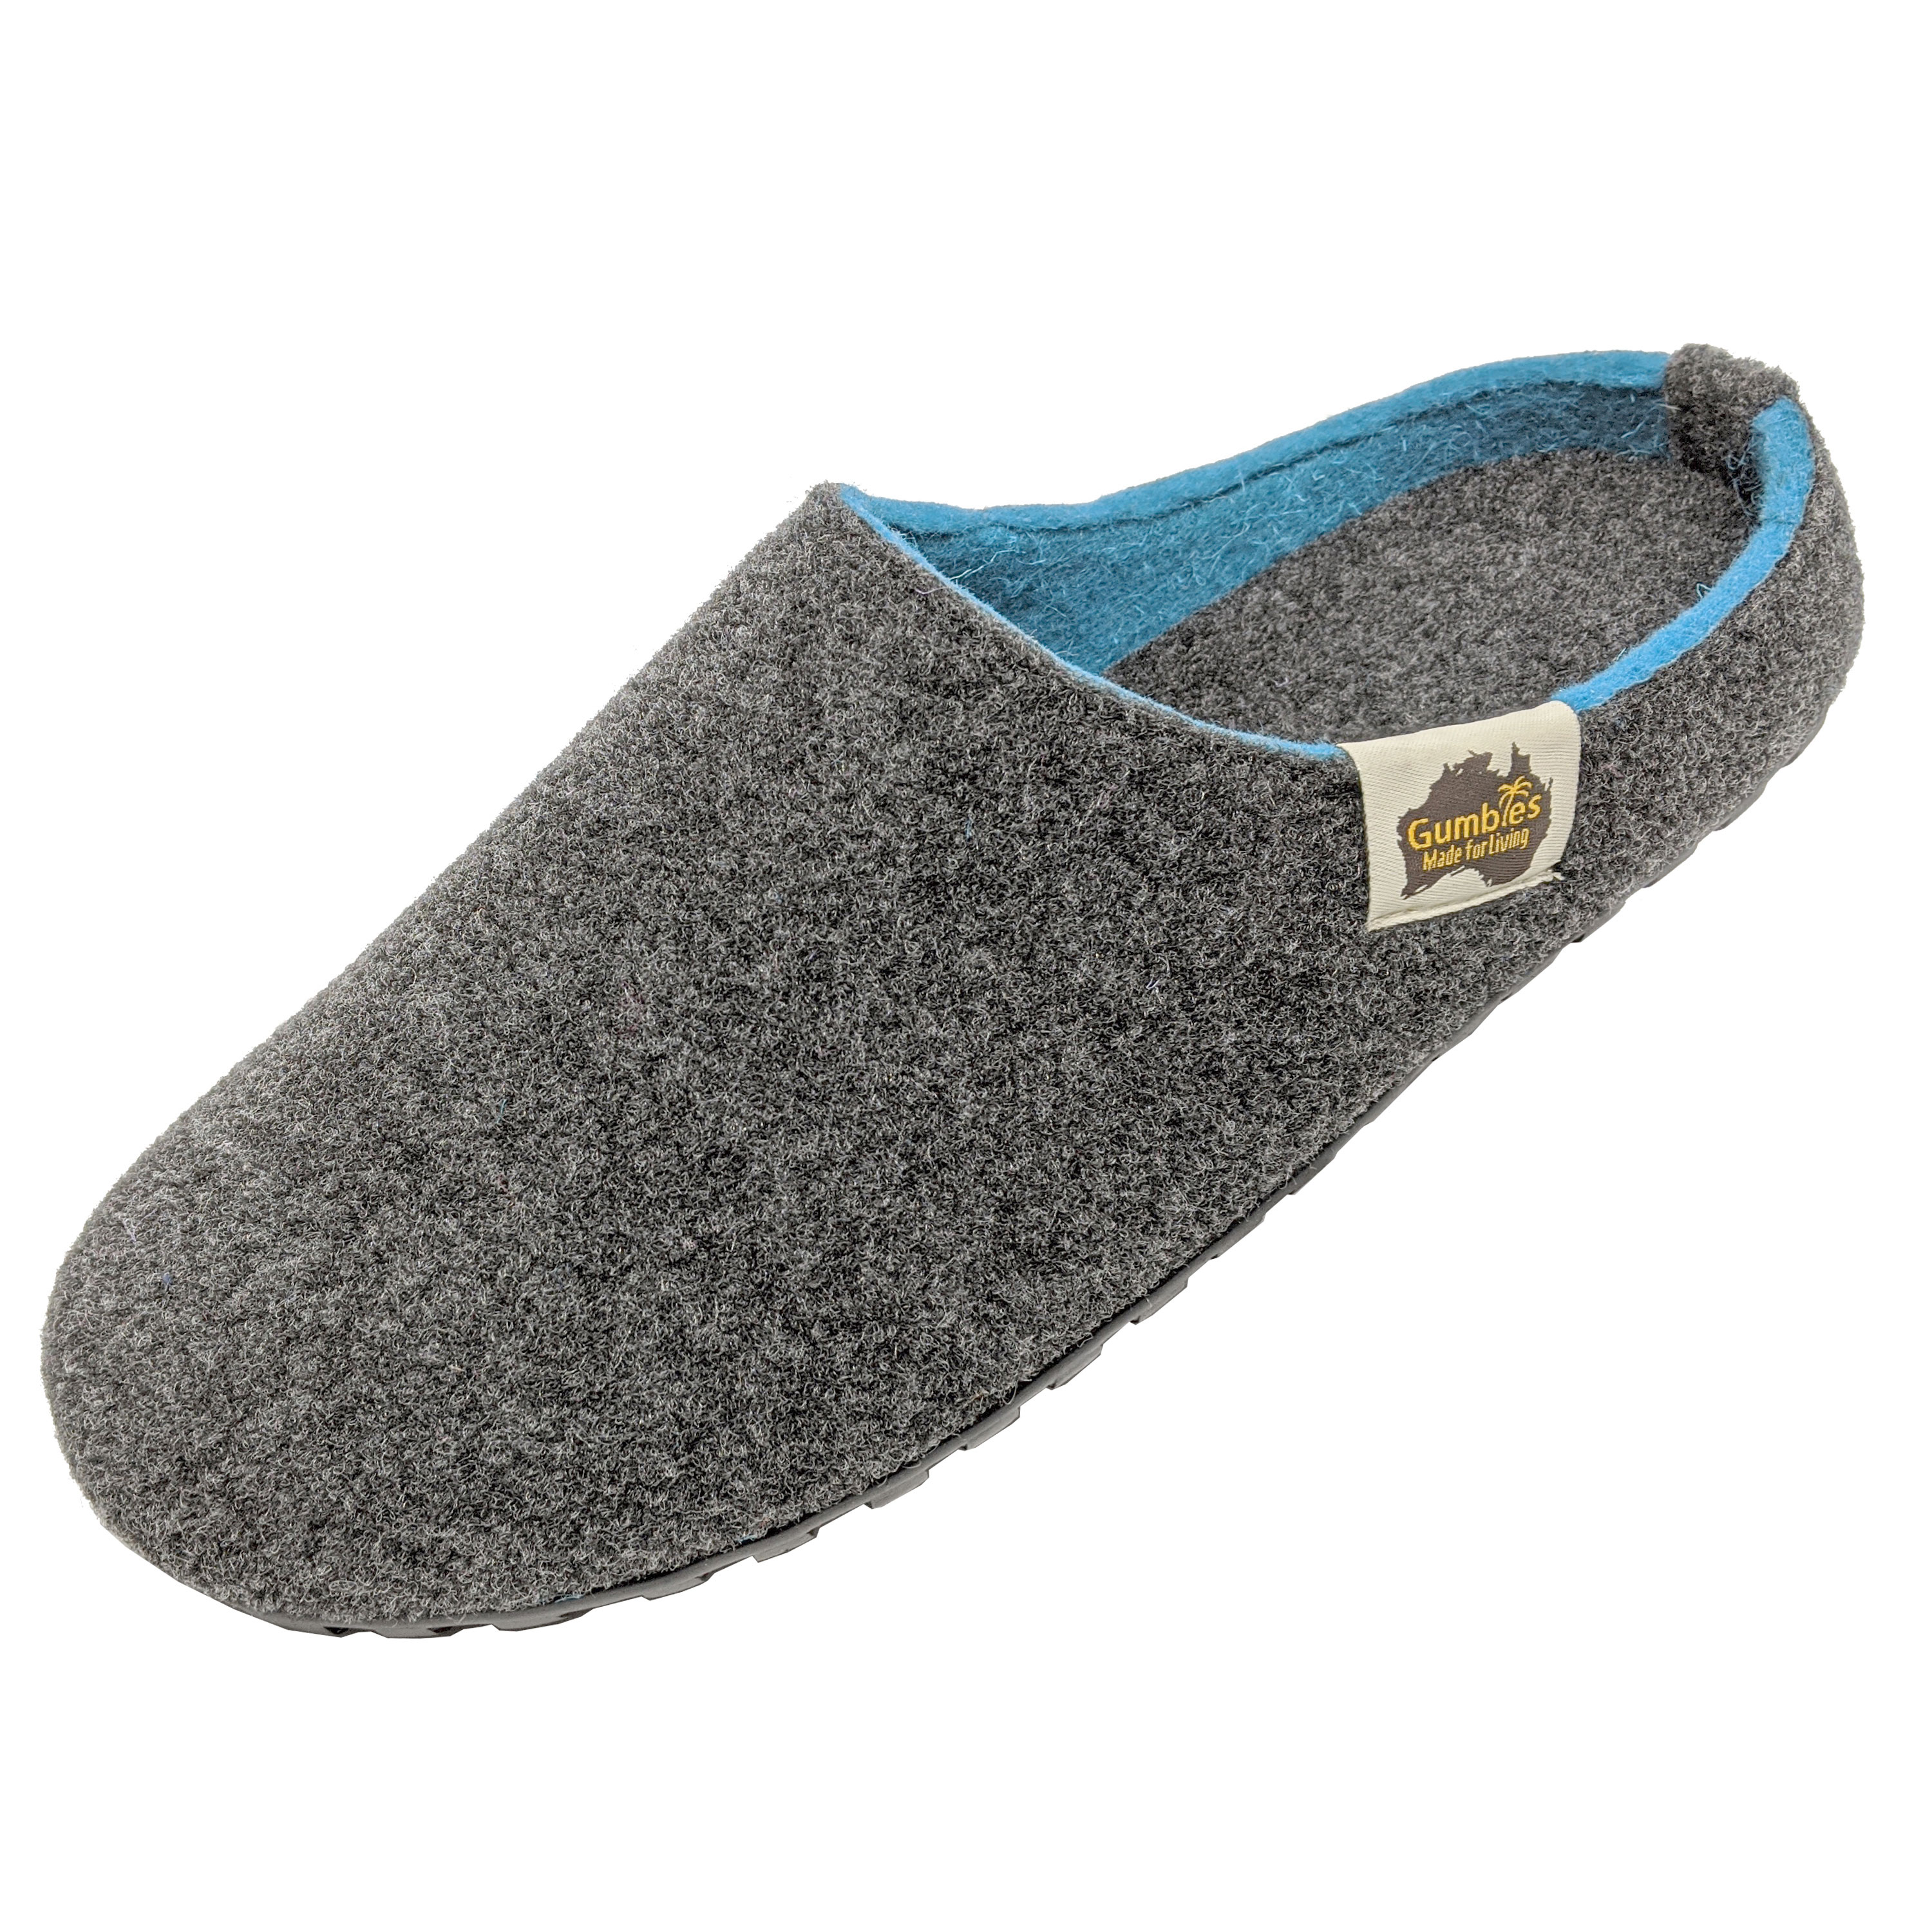 GUMBIES - Outback Slipper, CHARCOAL-TURQUOISE 